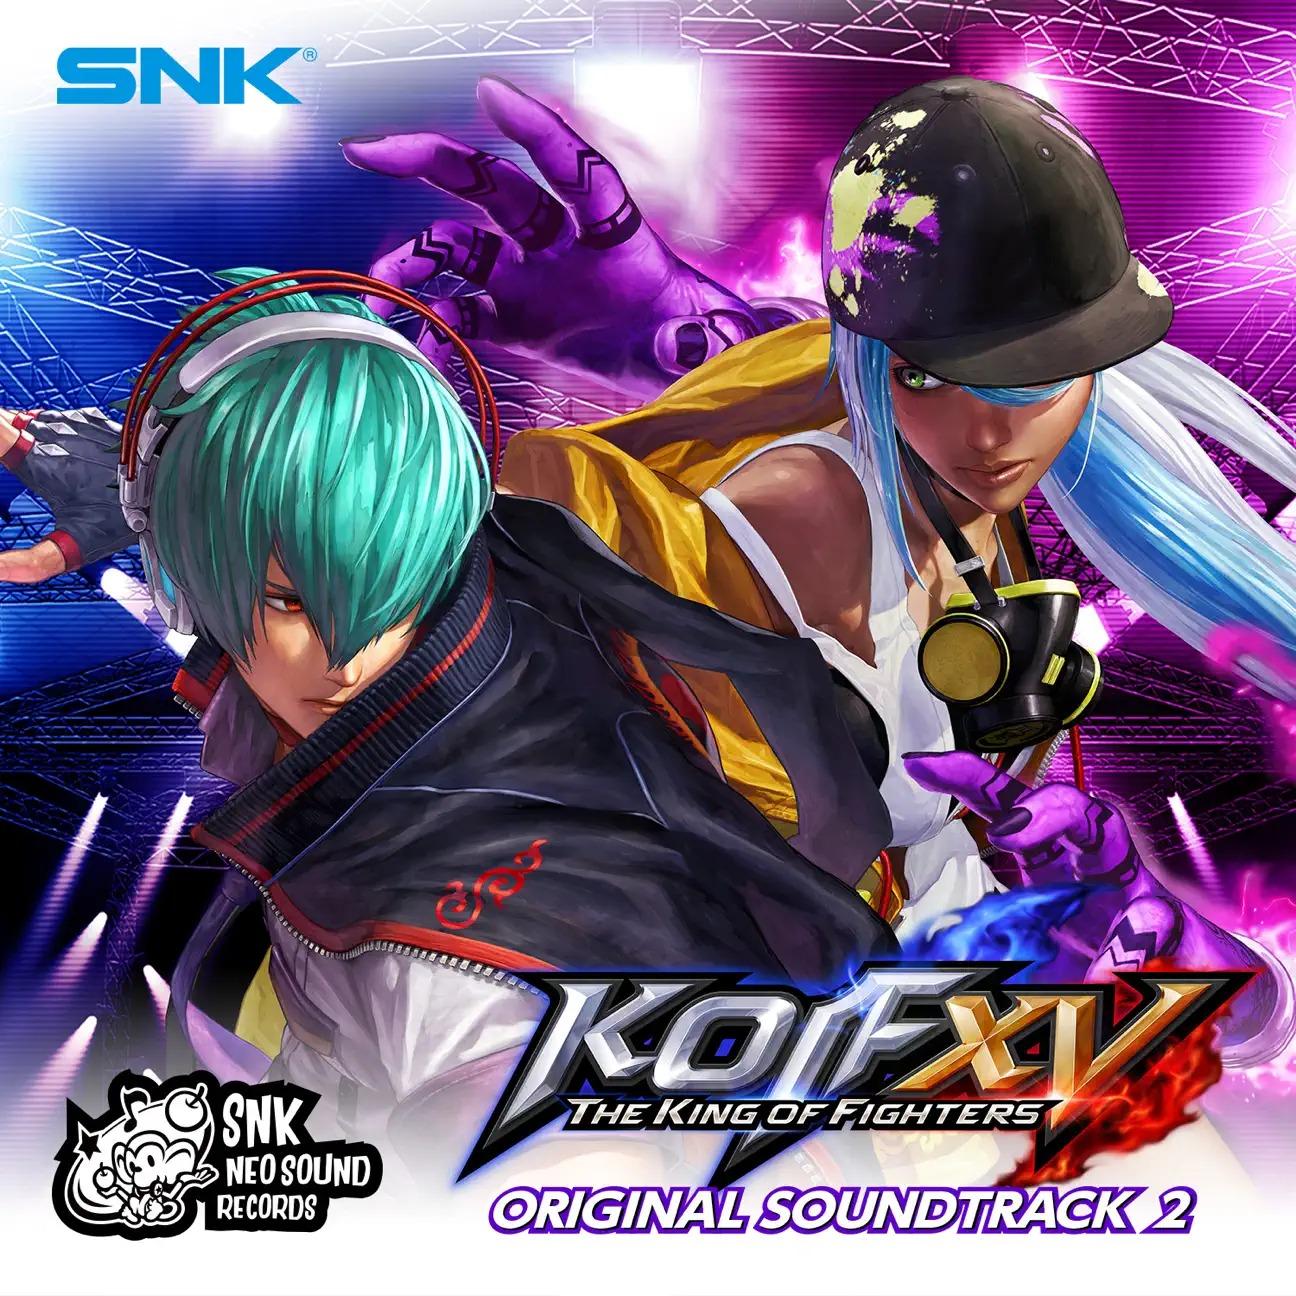 The King of Fighters XV Original Soundtrack 2